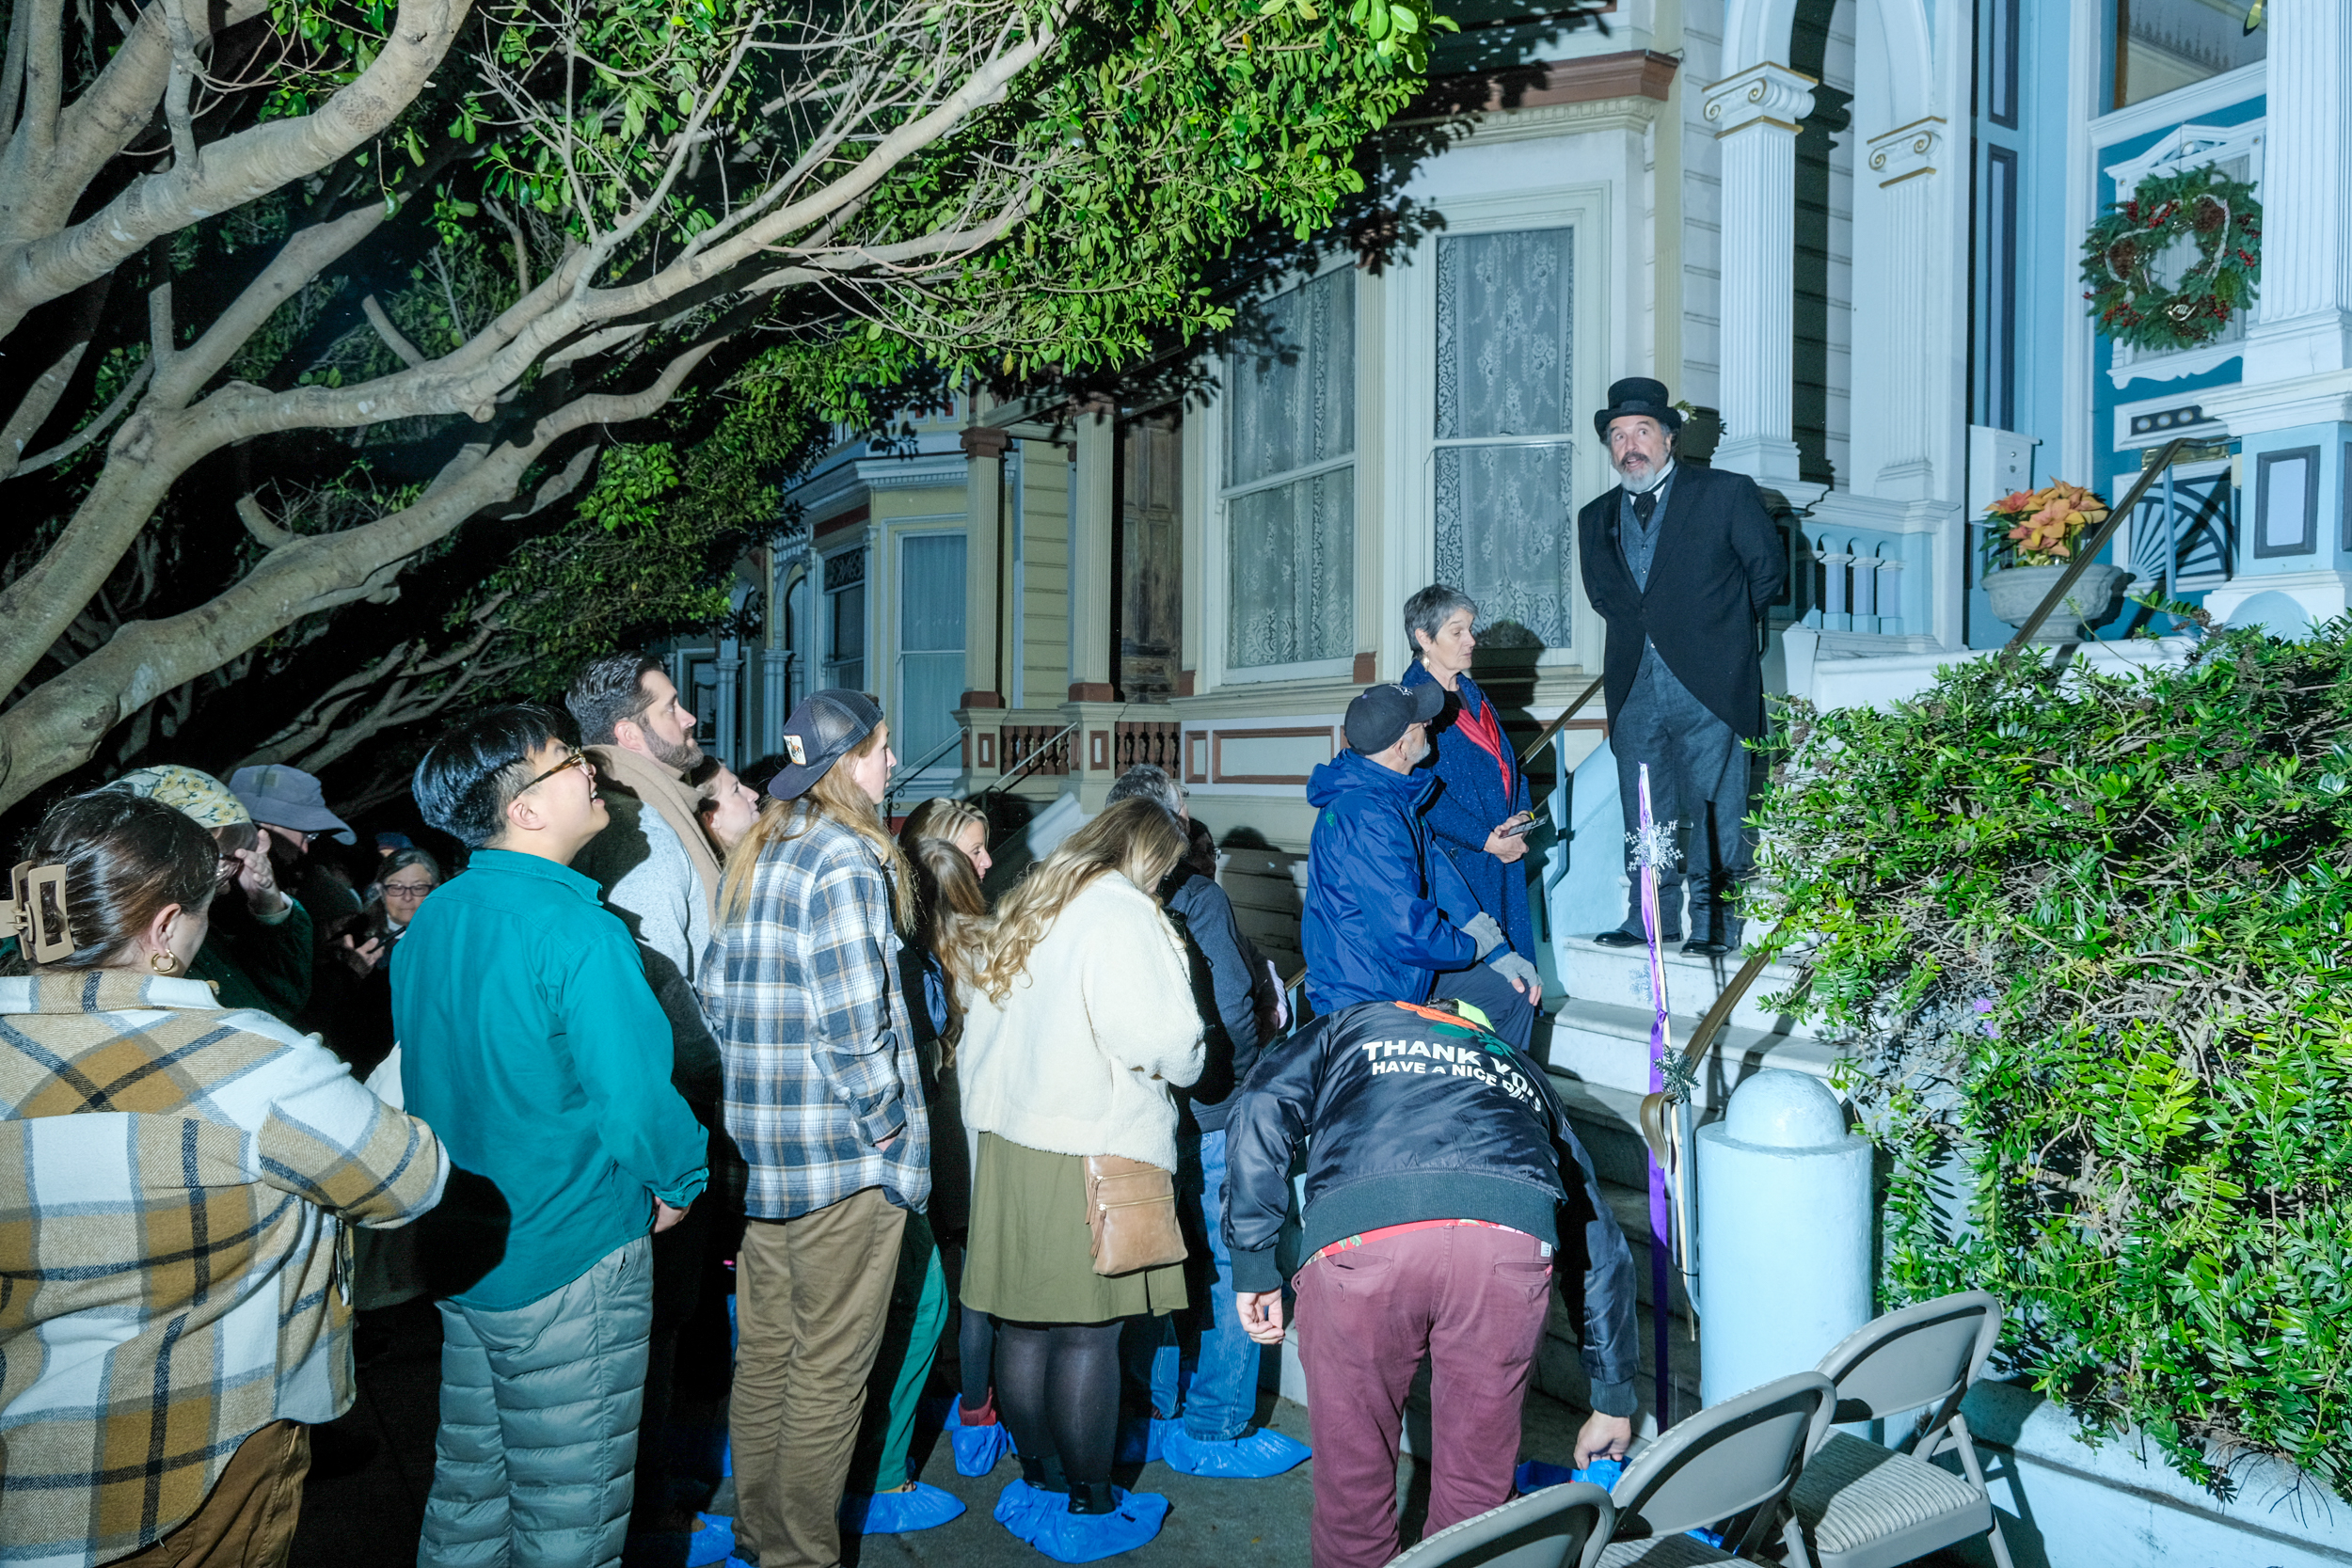 A line of people wait to get in an old victorian house.